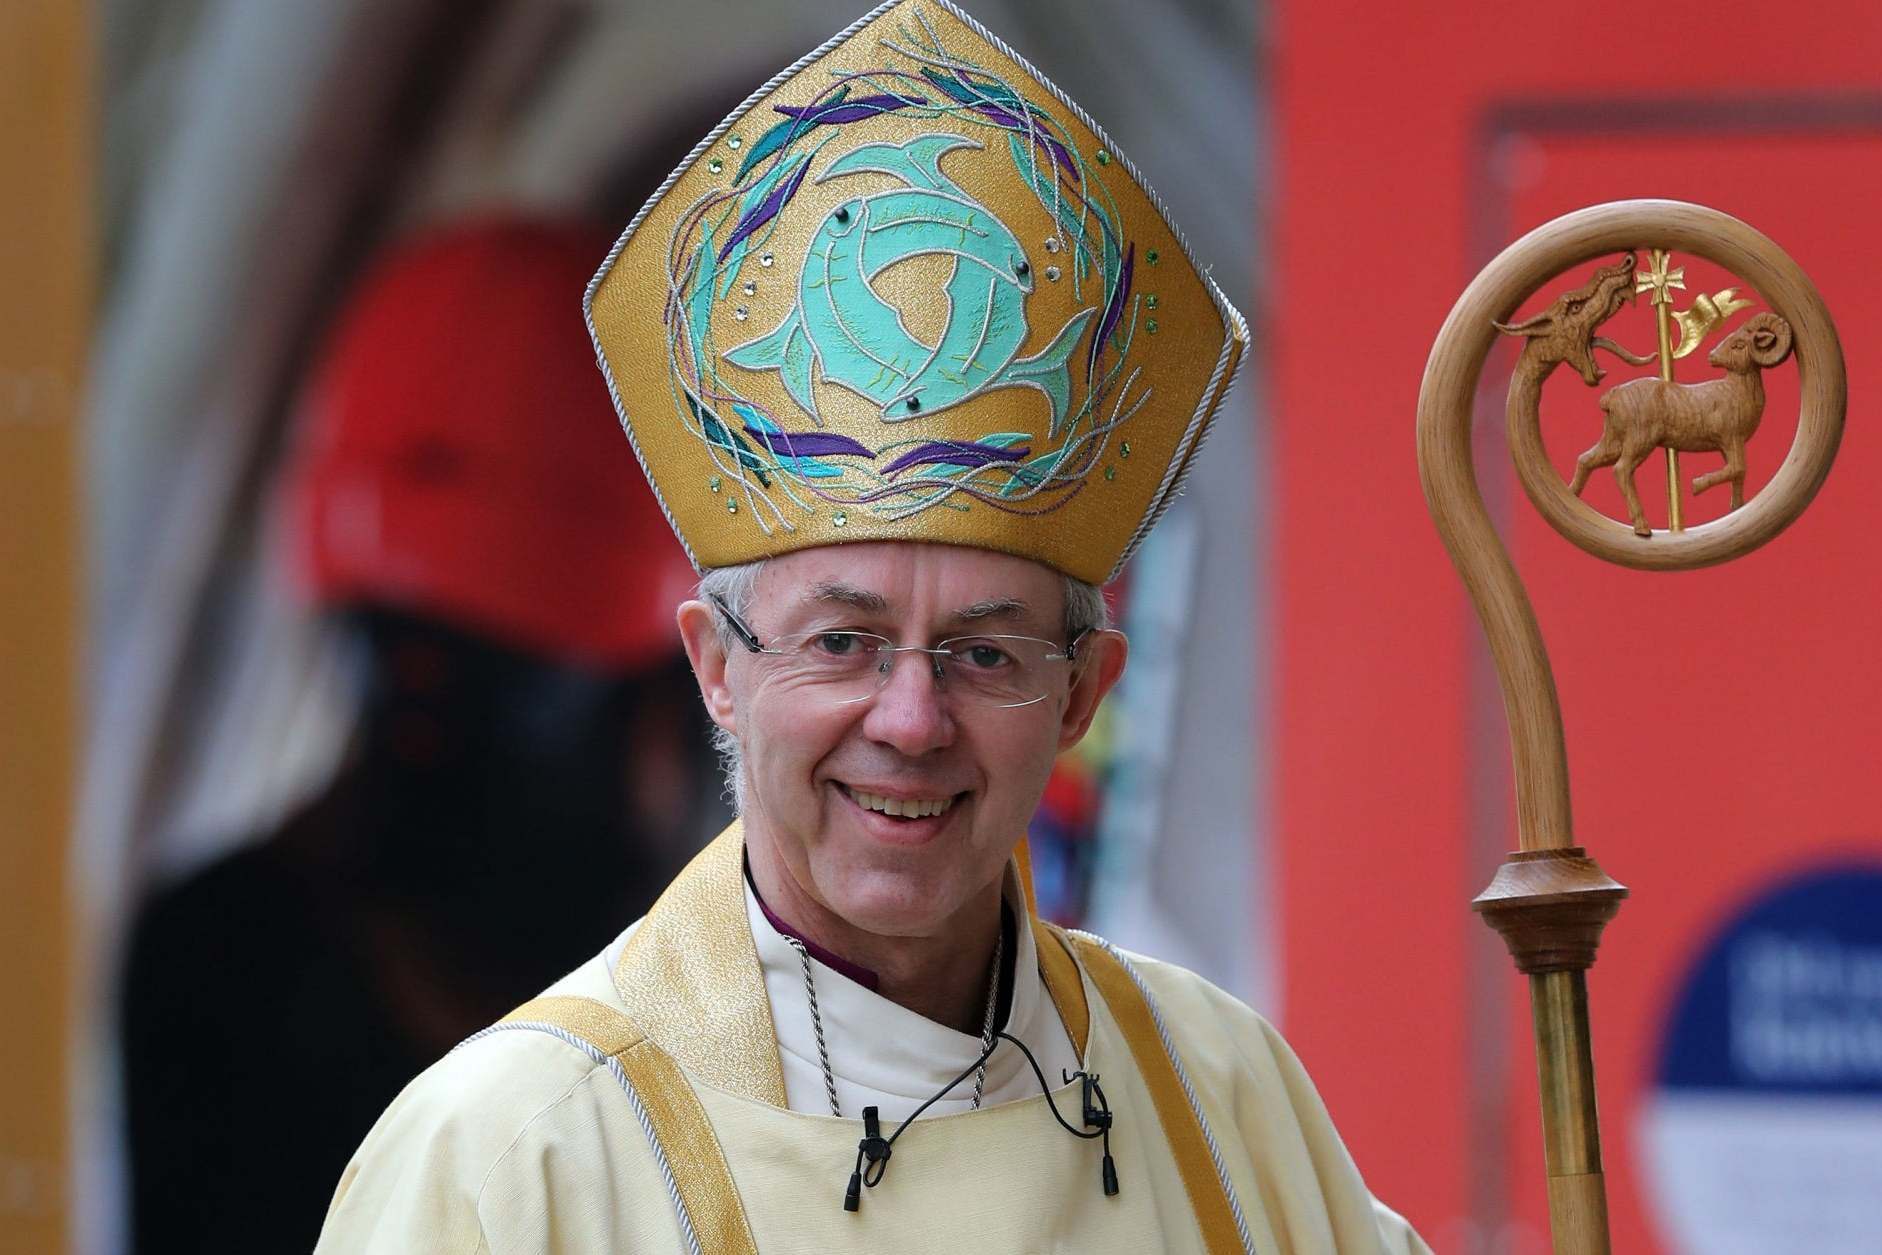 The Homeless Fund: Archbishop of Canterbury Justin Welby joins faith leaders calling for action on homelessness